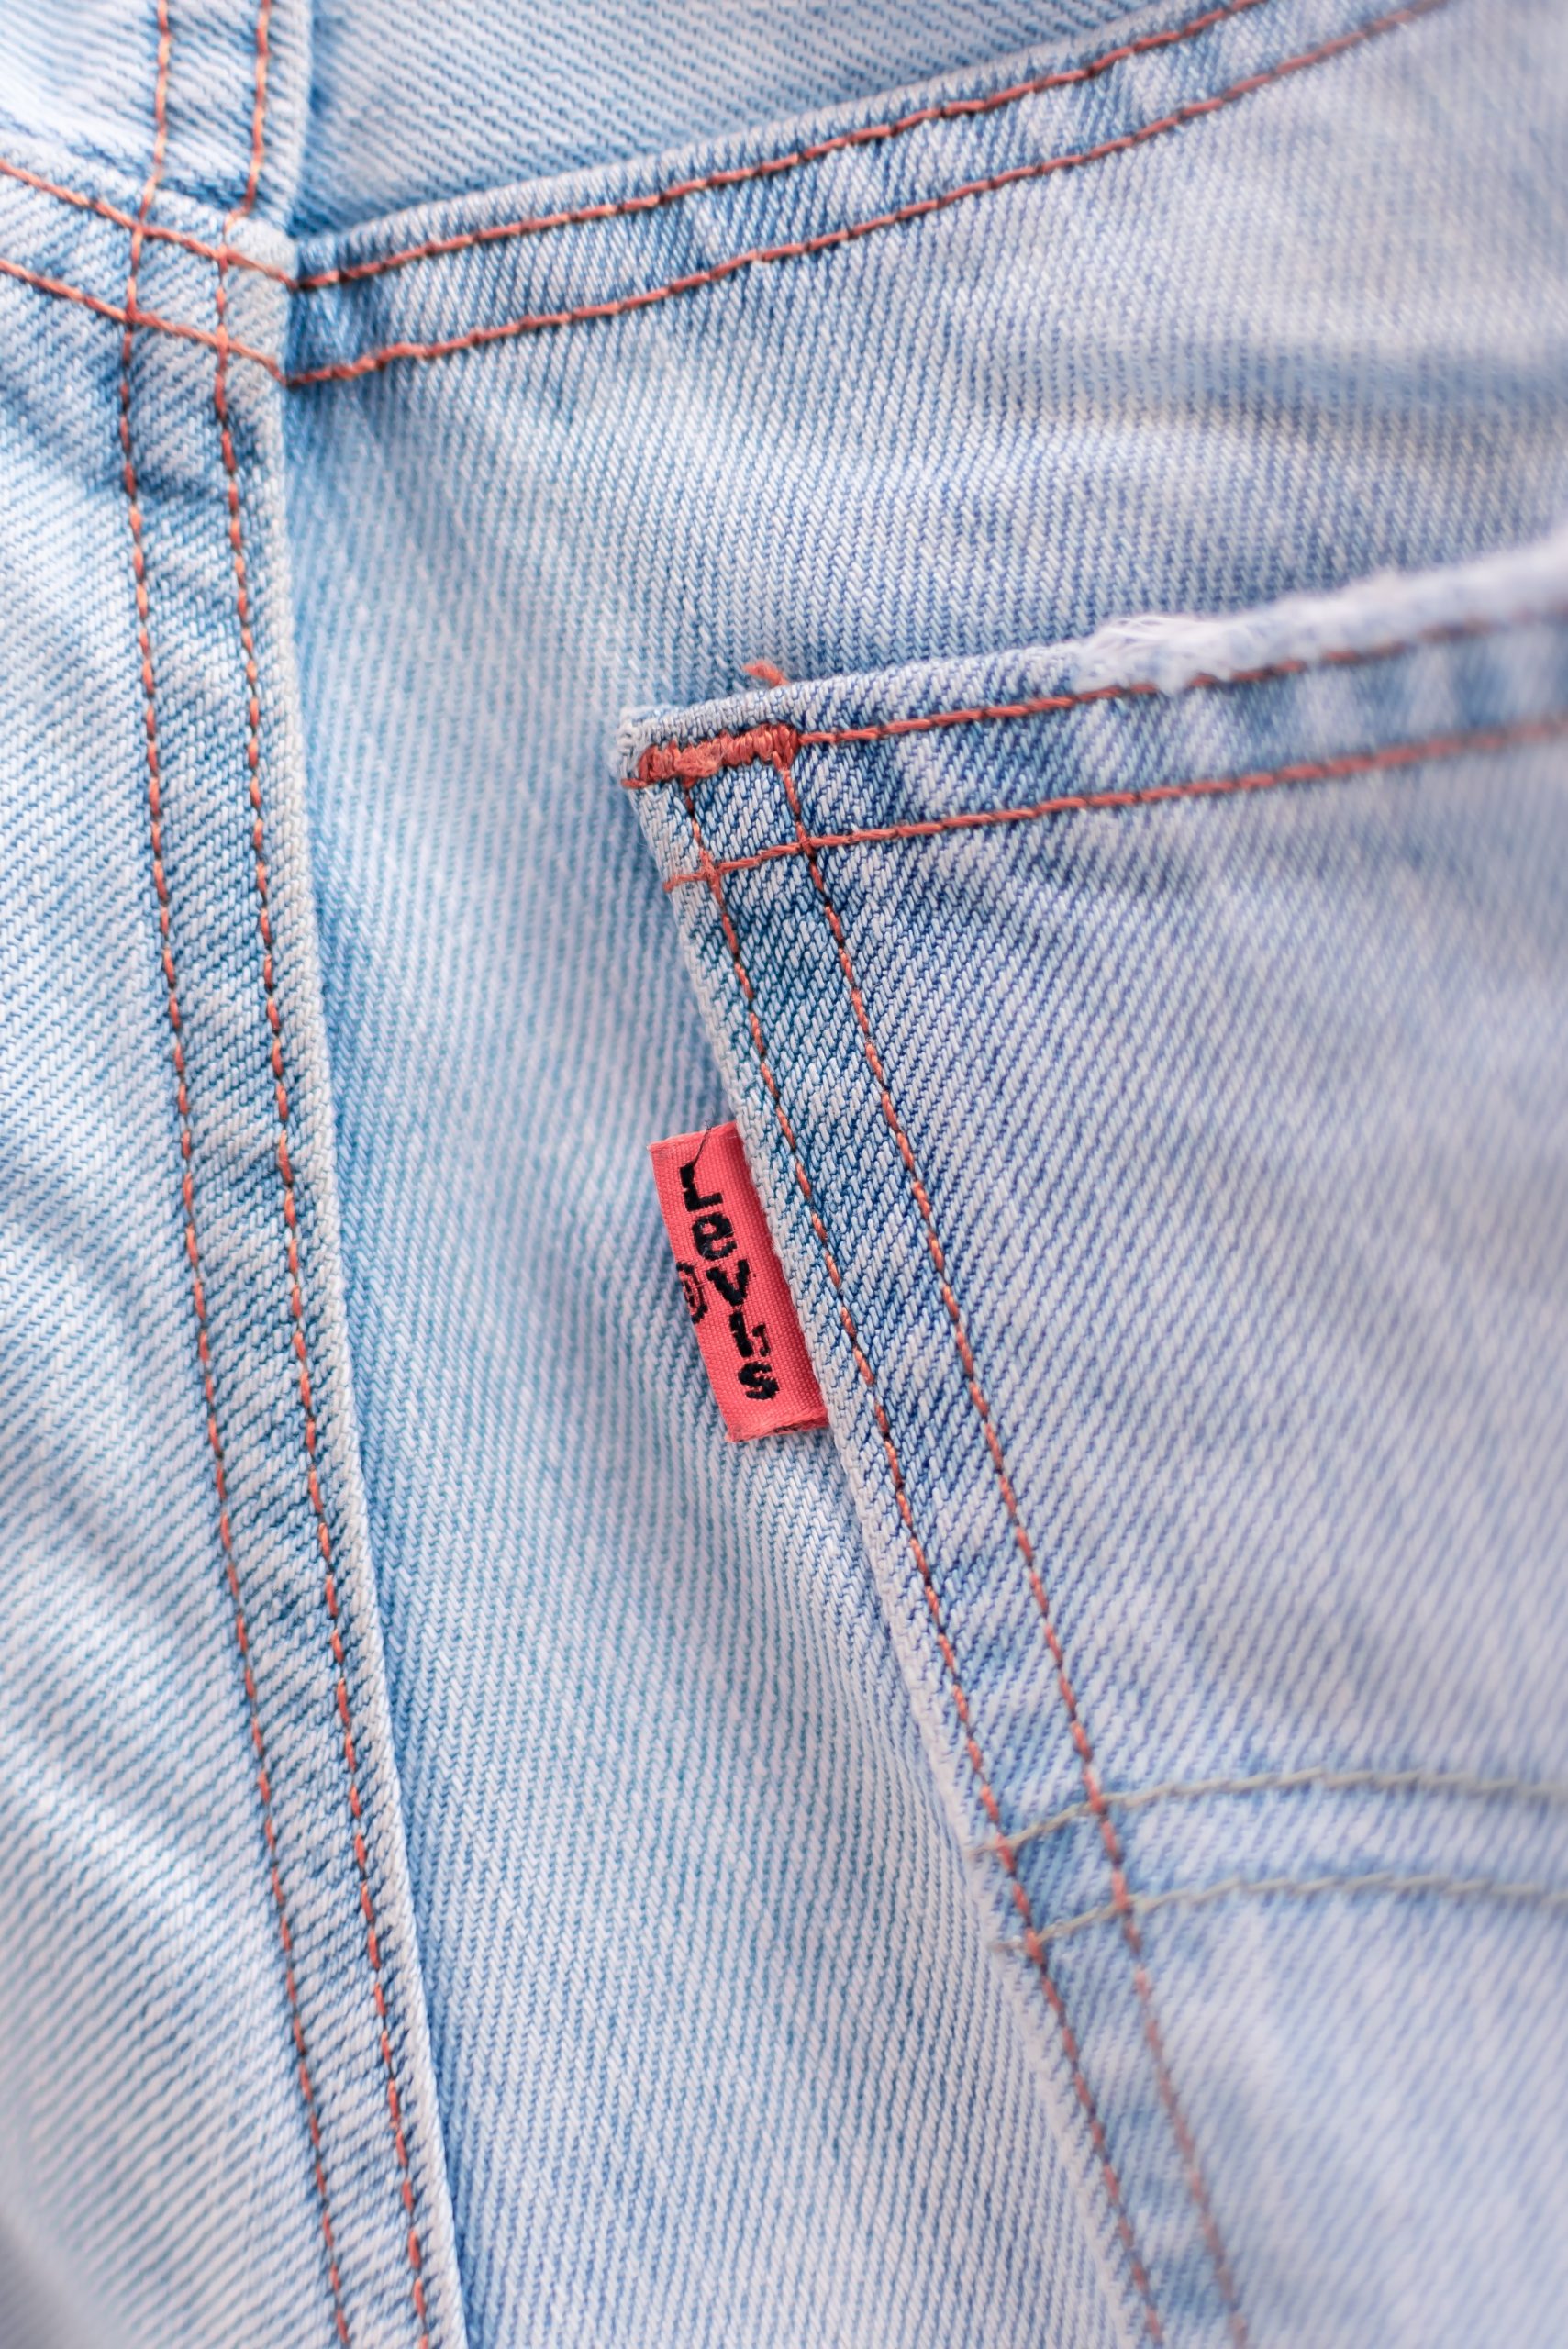 Levi's 505 vs 514 Jeans: Which One is Best for You? - Next Fashion Era